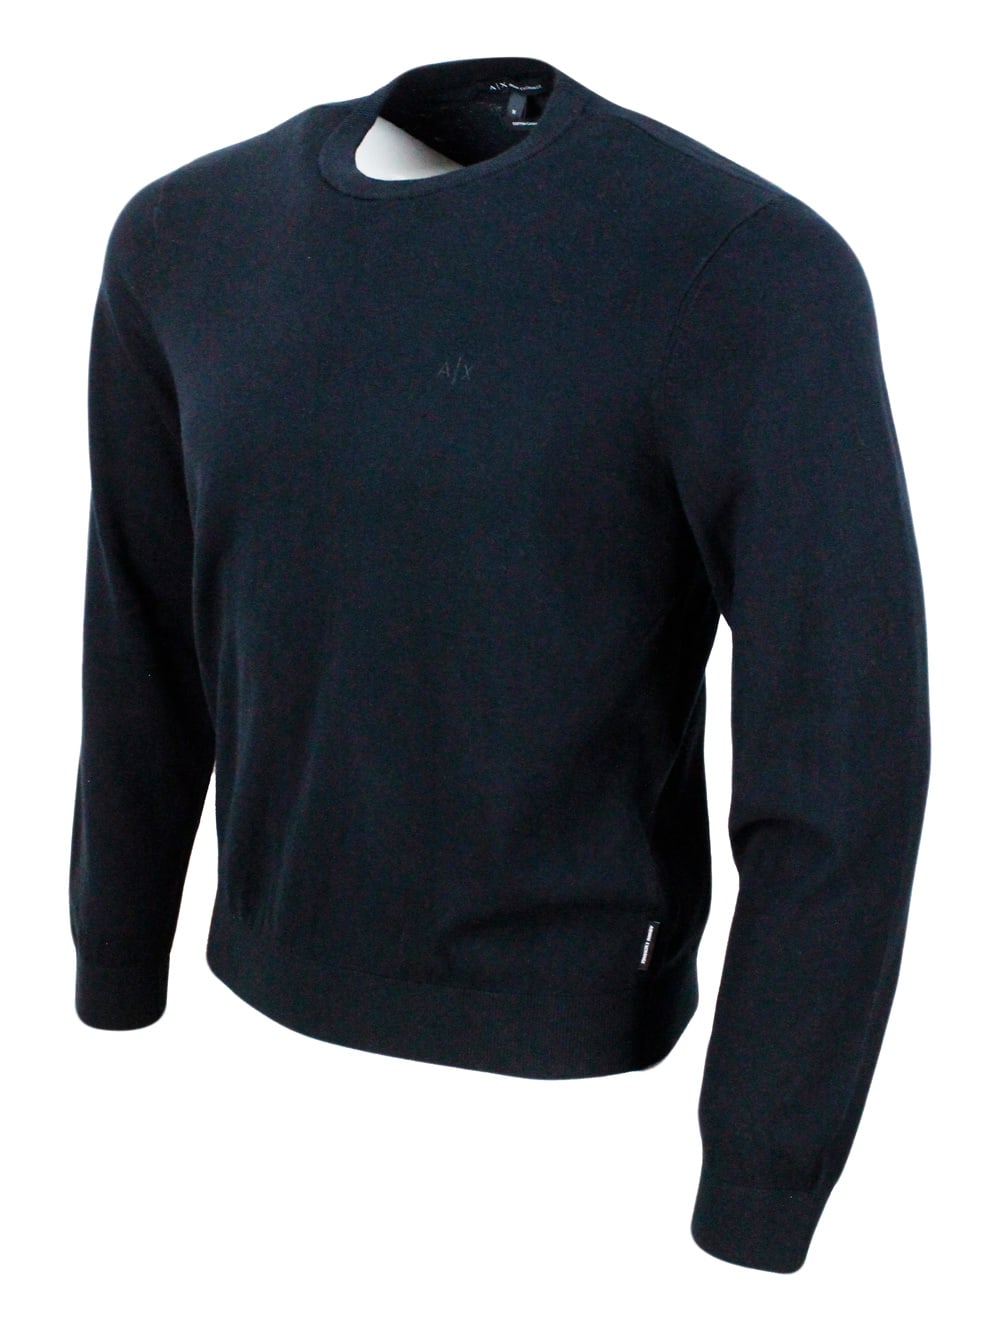 Shop Armani Collezioni Lightweight Long-sleeved Crew-neck Sweater Made Of Warm Cotton And Cashmere With Contrasting Color P In Black